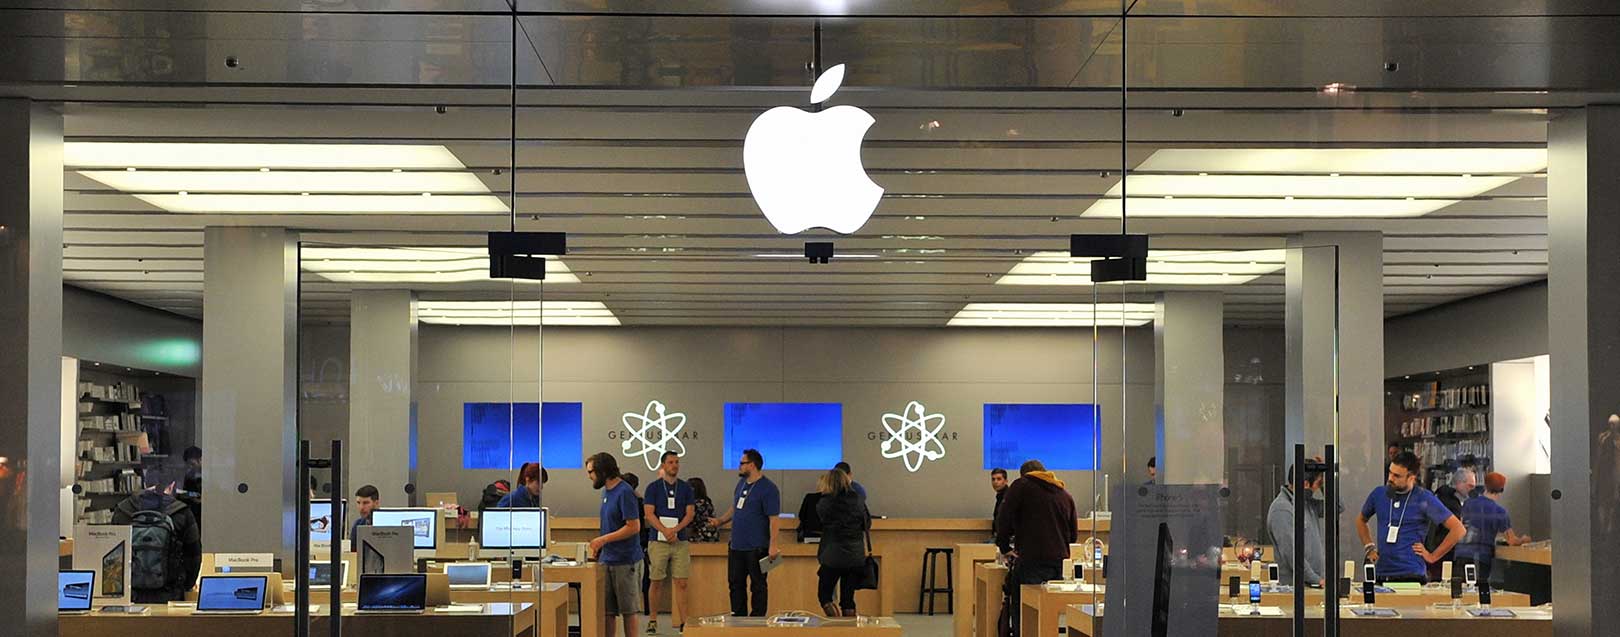 Apple’s unit in India will benefit retail sector: Google